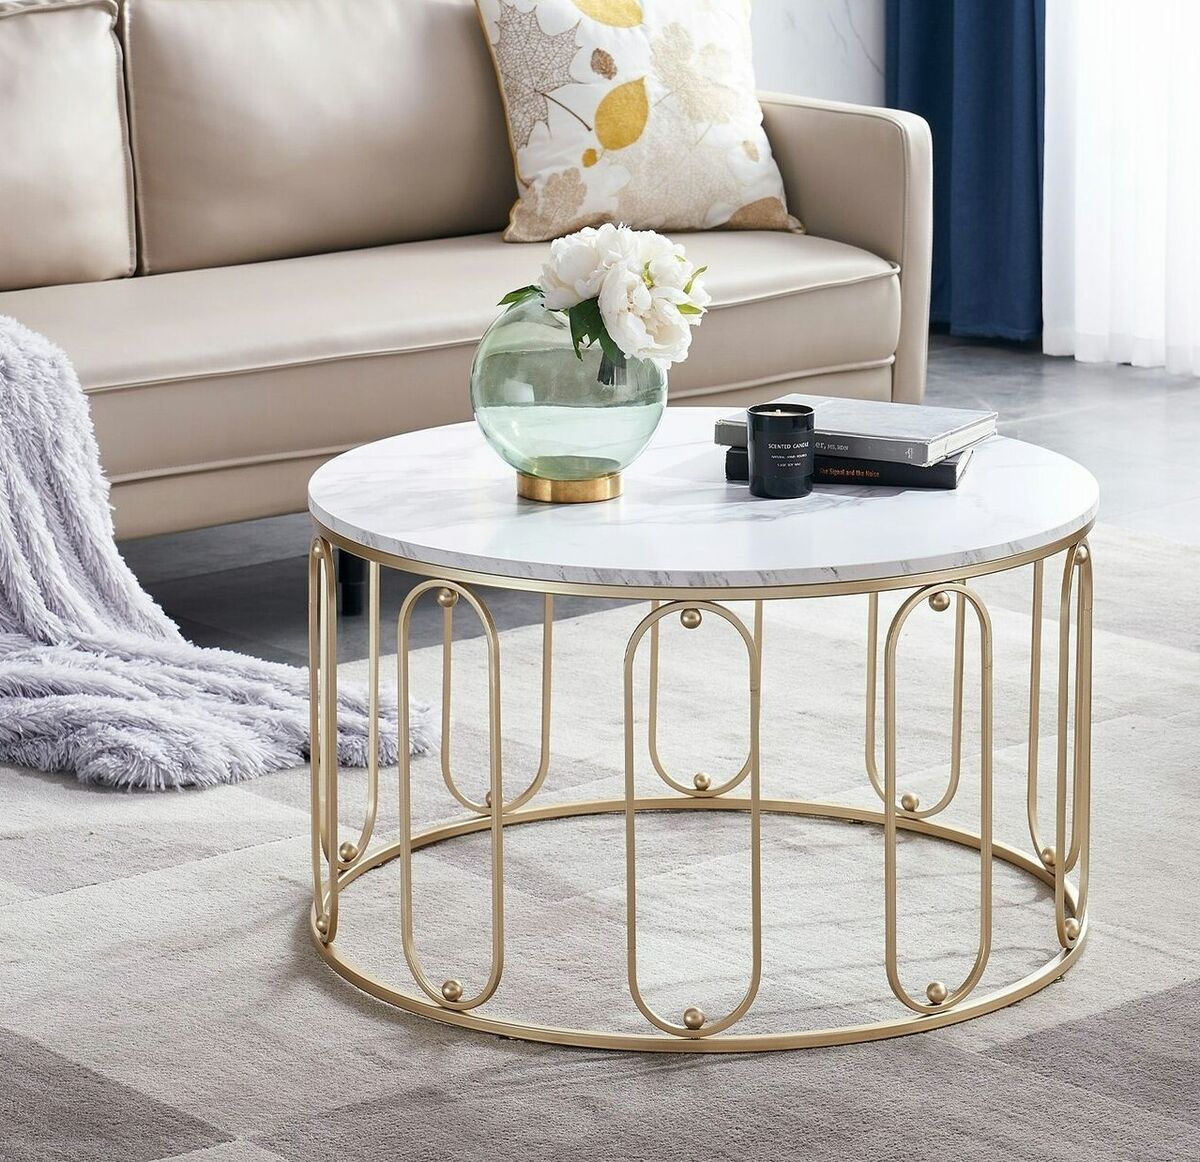 Ivinta Modern Nesting Coffee Table, Home Round Cocktail Table With Metal  Frame | Ebay With Regard To Modern Nesting Coffee Tables (View 2 of 15)